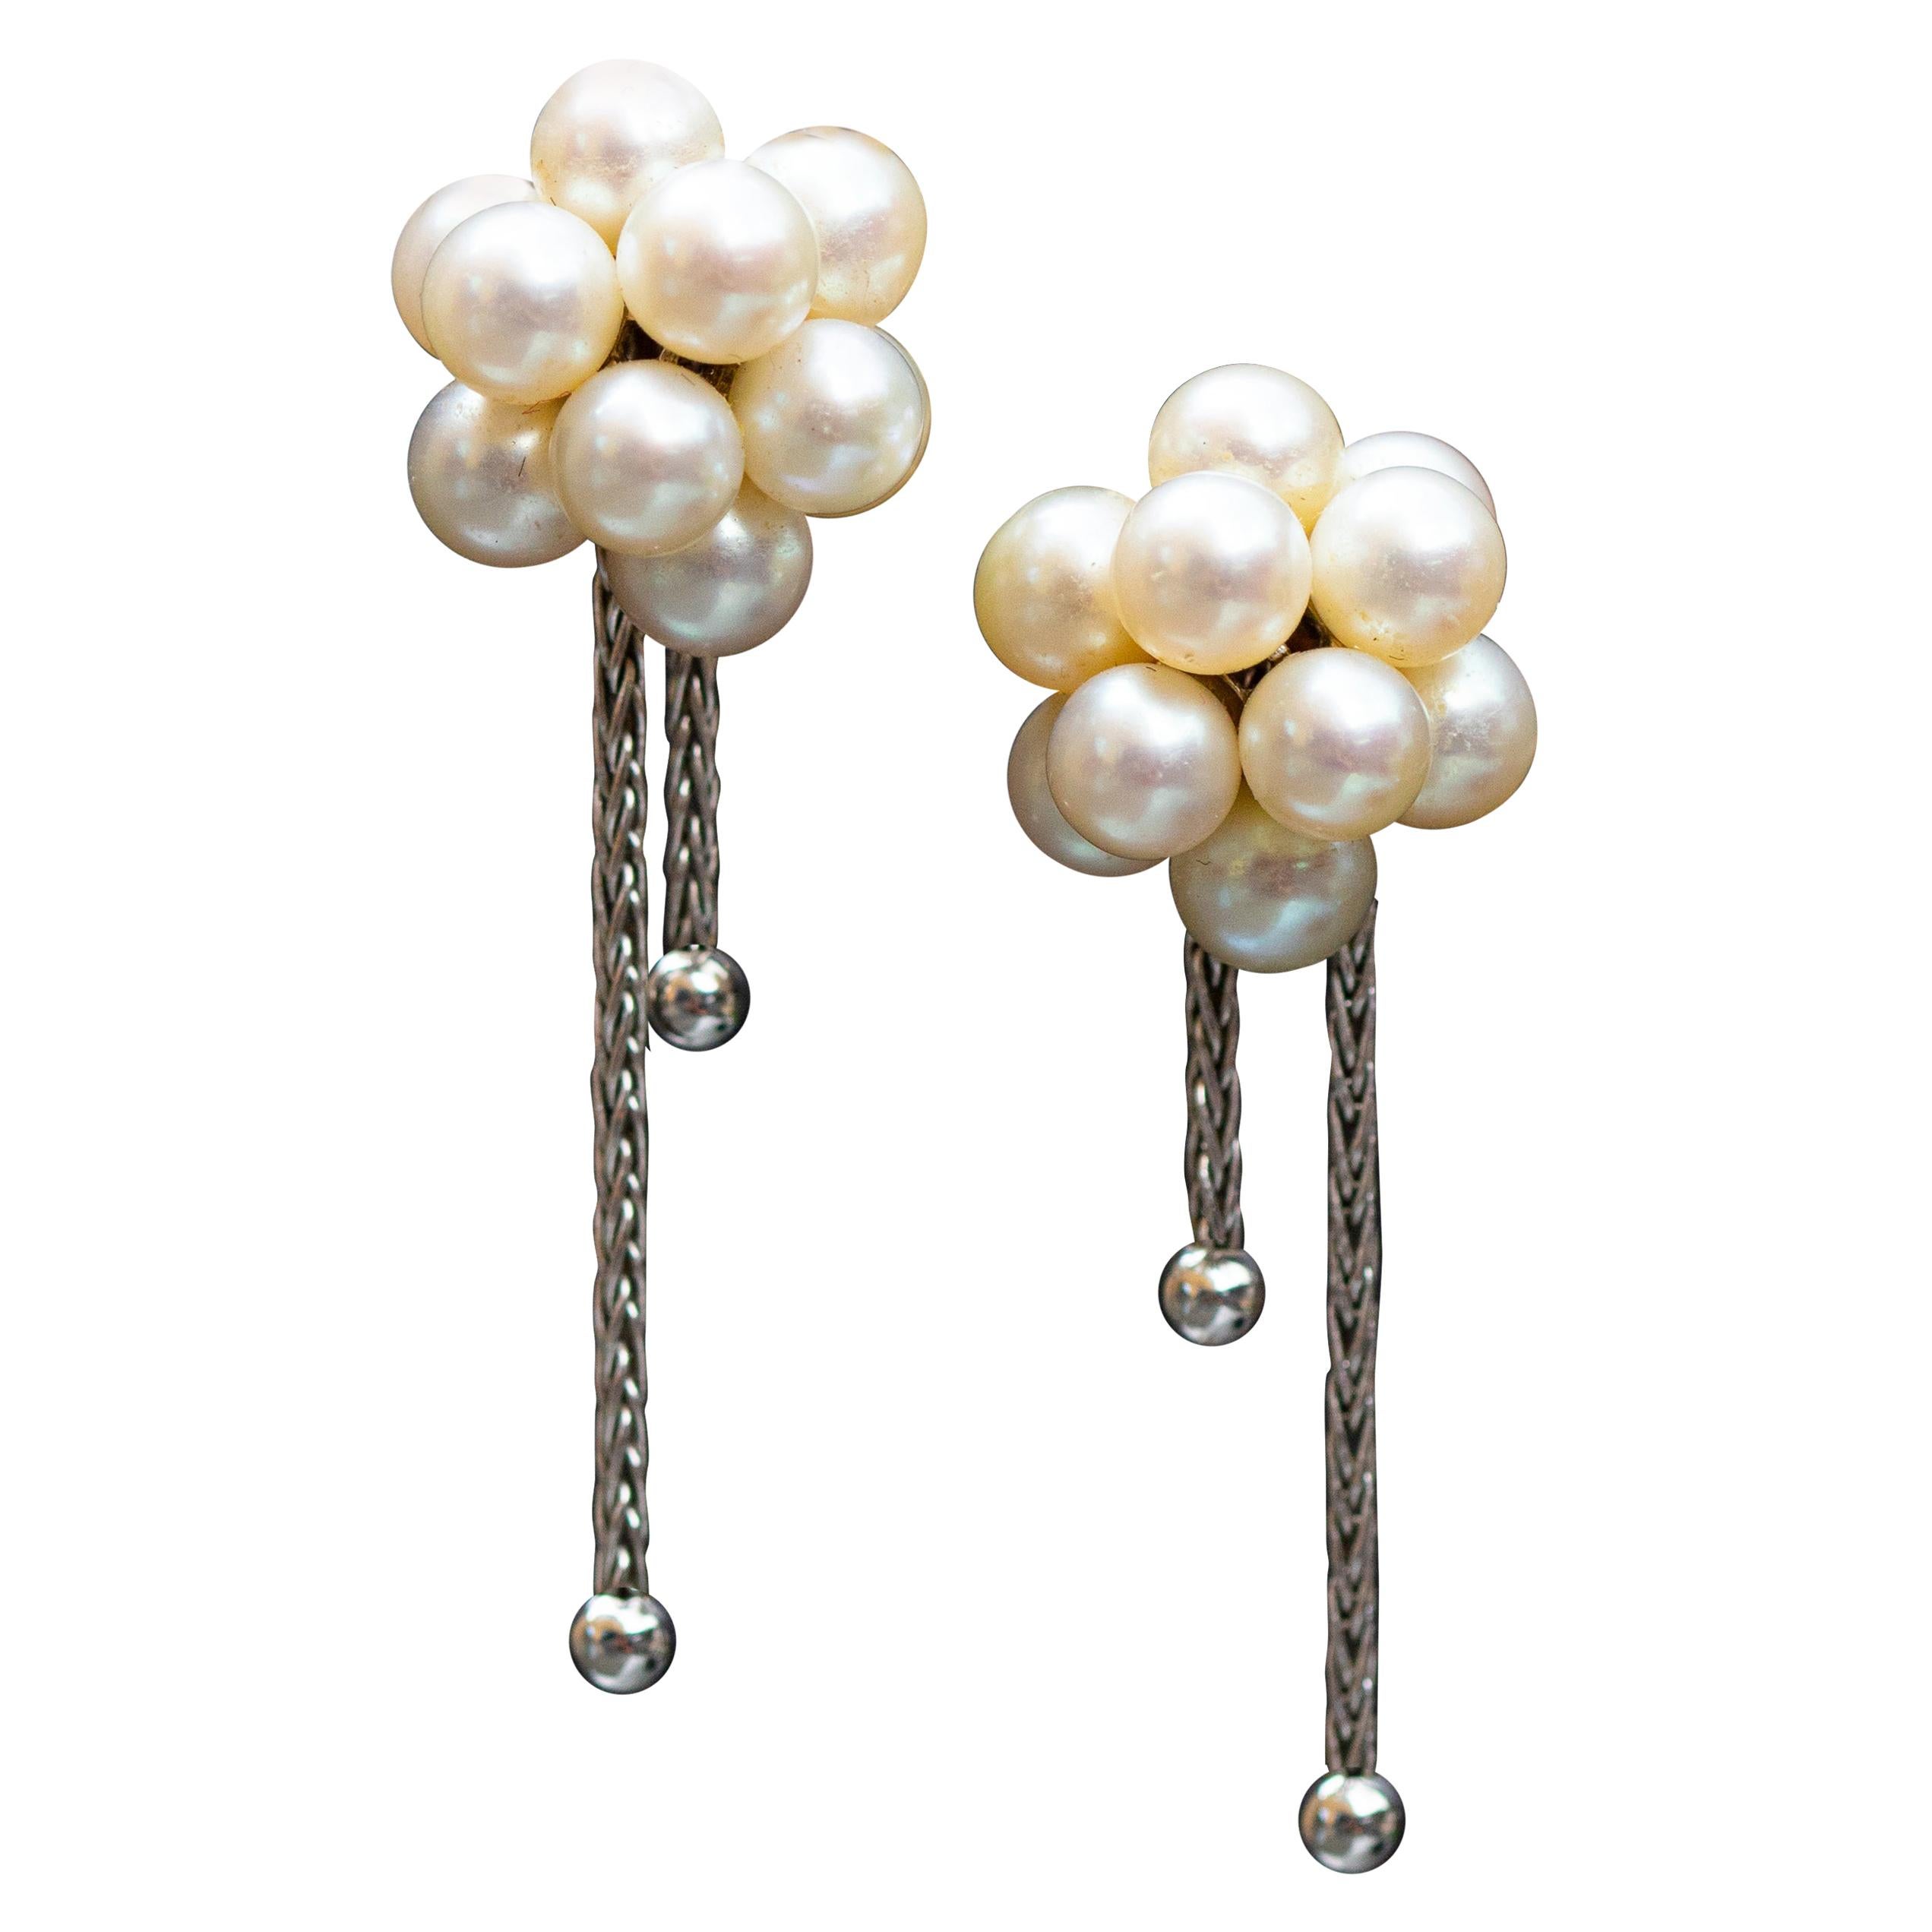 Boucheron 18 Carat Gold and Pearl Cluster Earrings